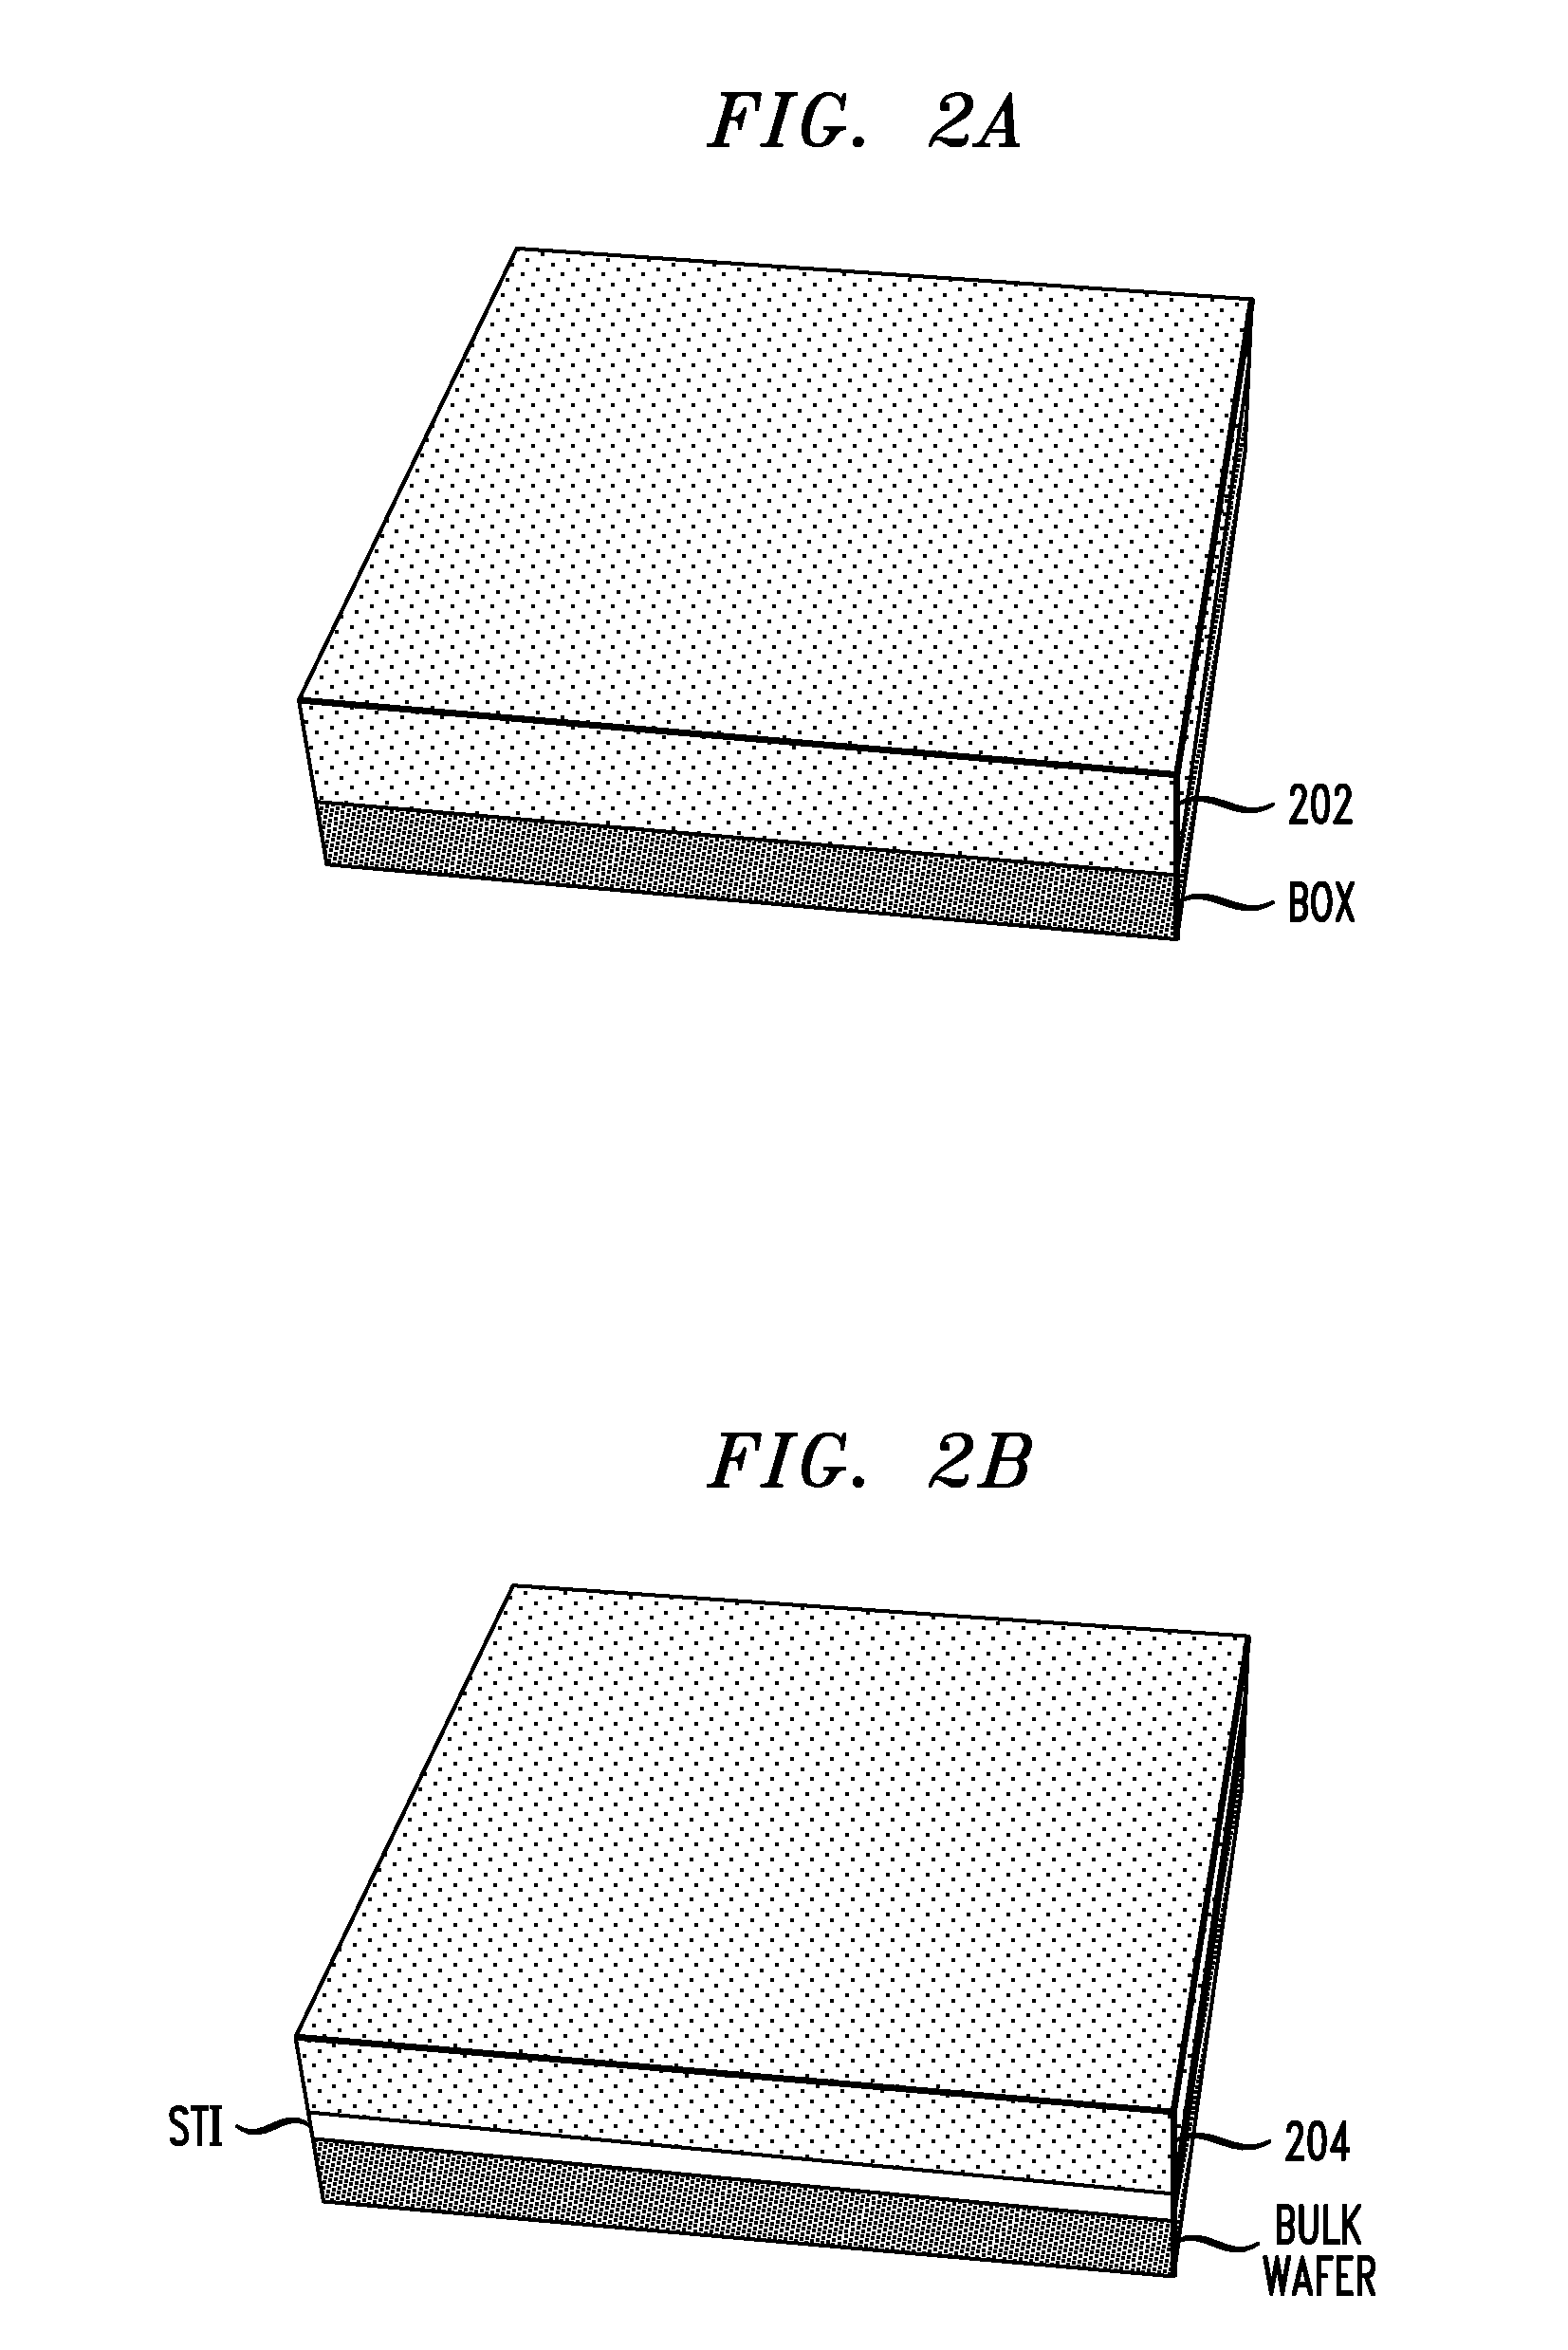 Method for Keyhole Repair in Replacement Metal Gate Integration Through the Use of a Printable Dielectric